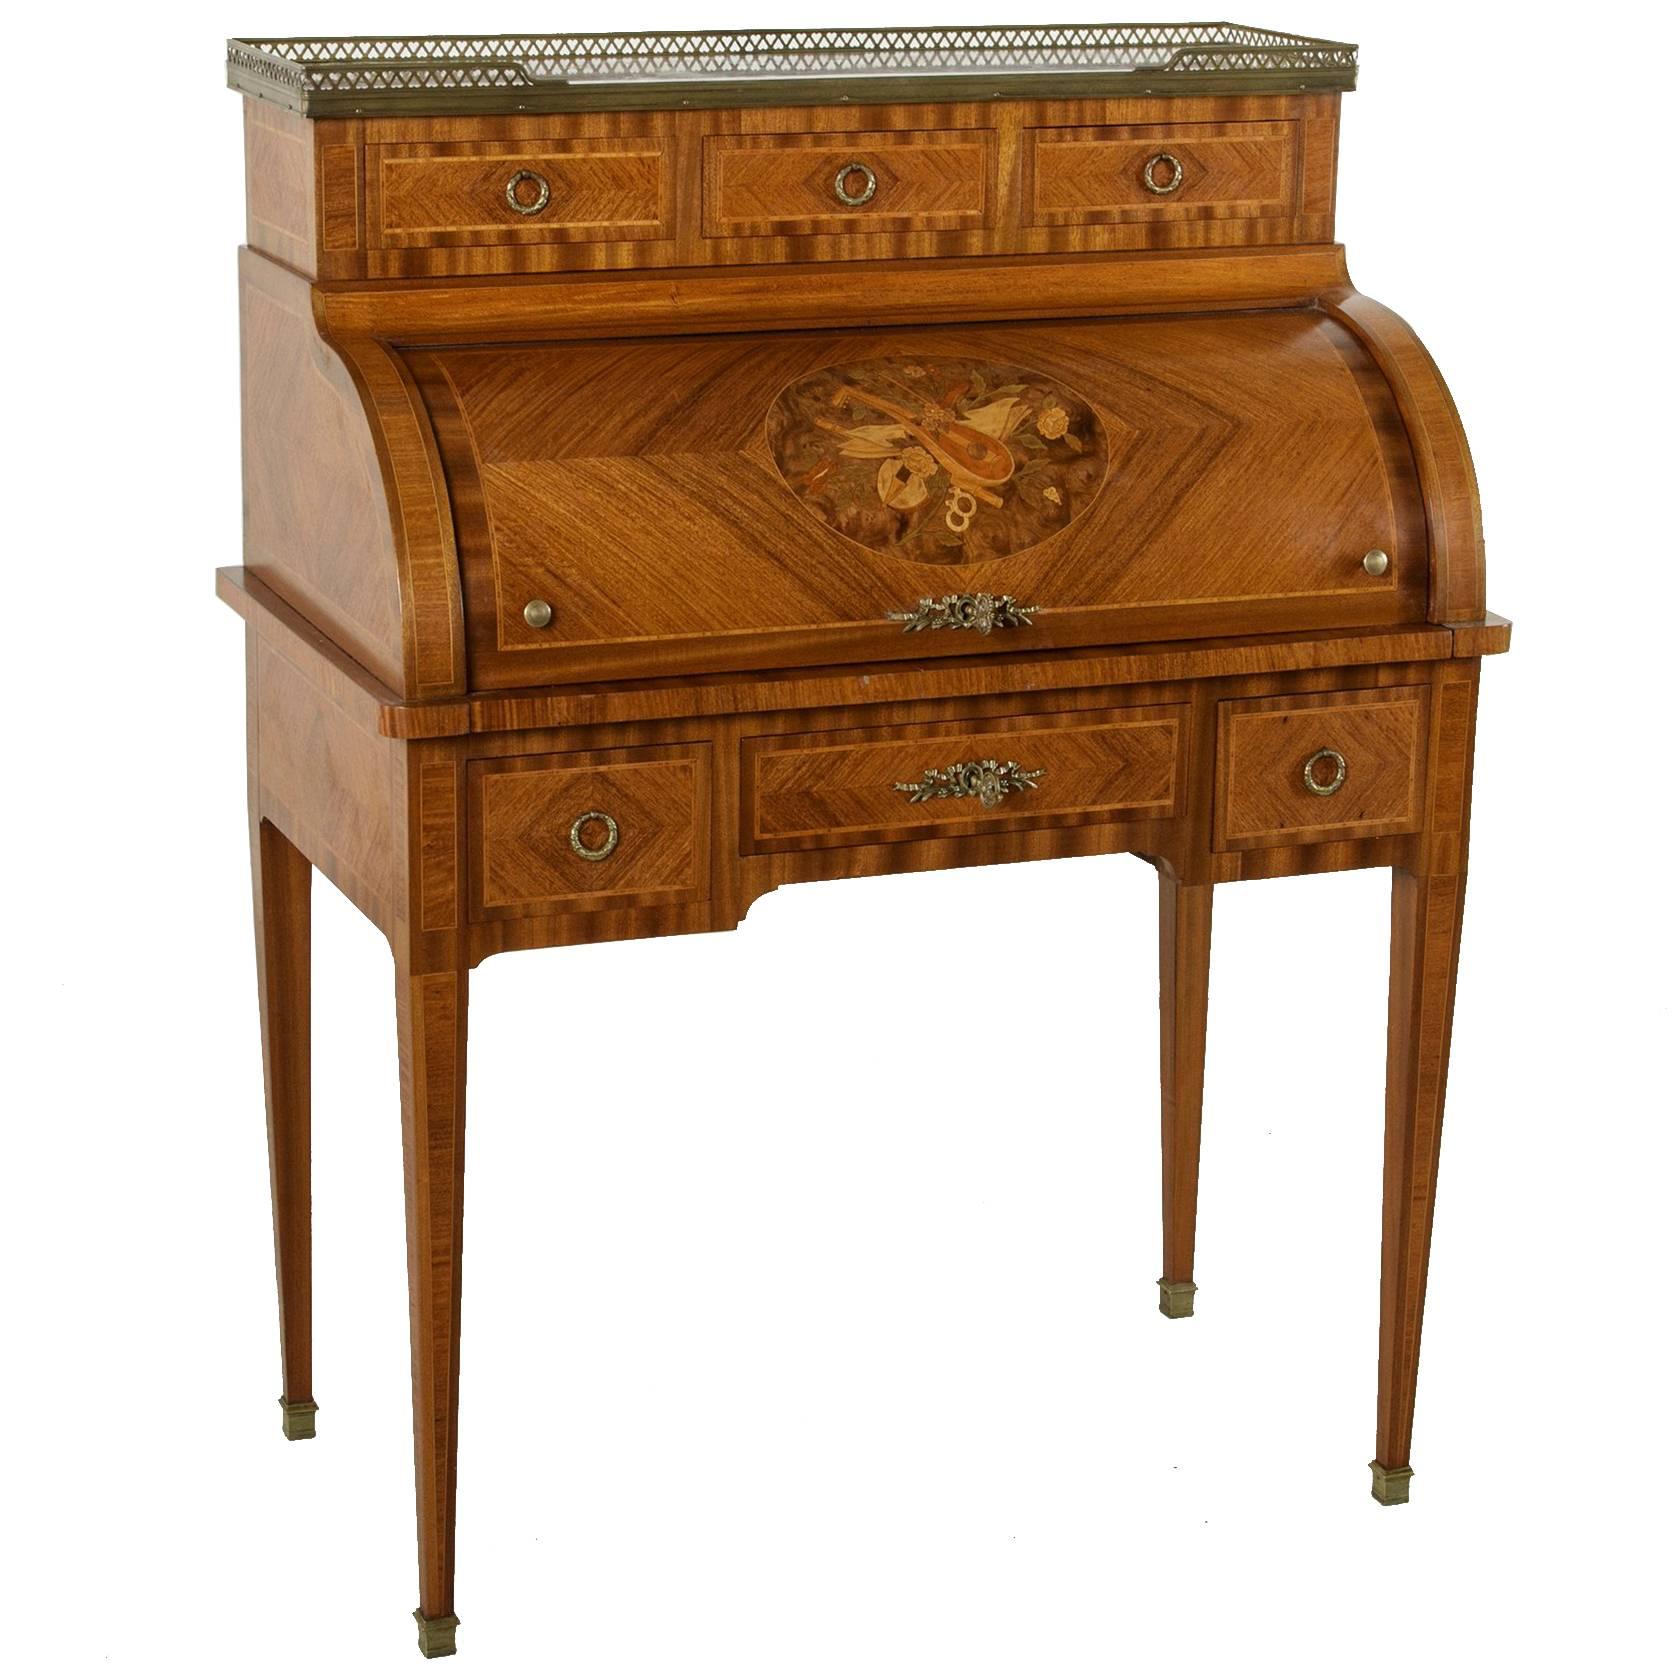 19th Century Louis XVI Marquetry Cylinder Desk With Inlaid Musical Instruments